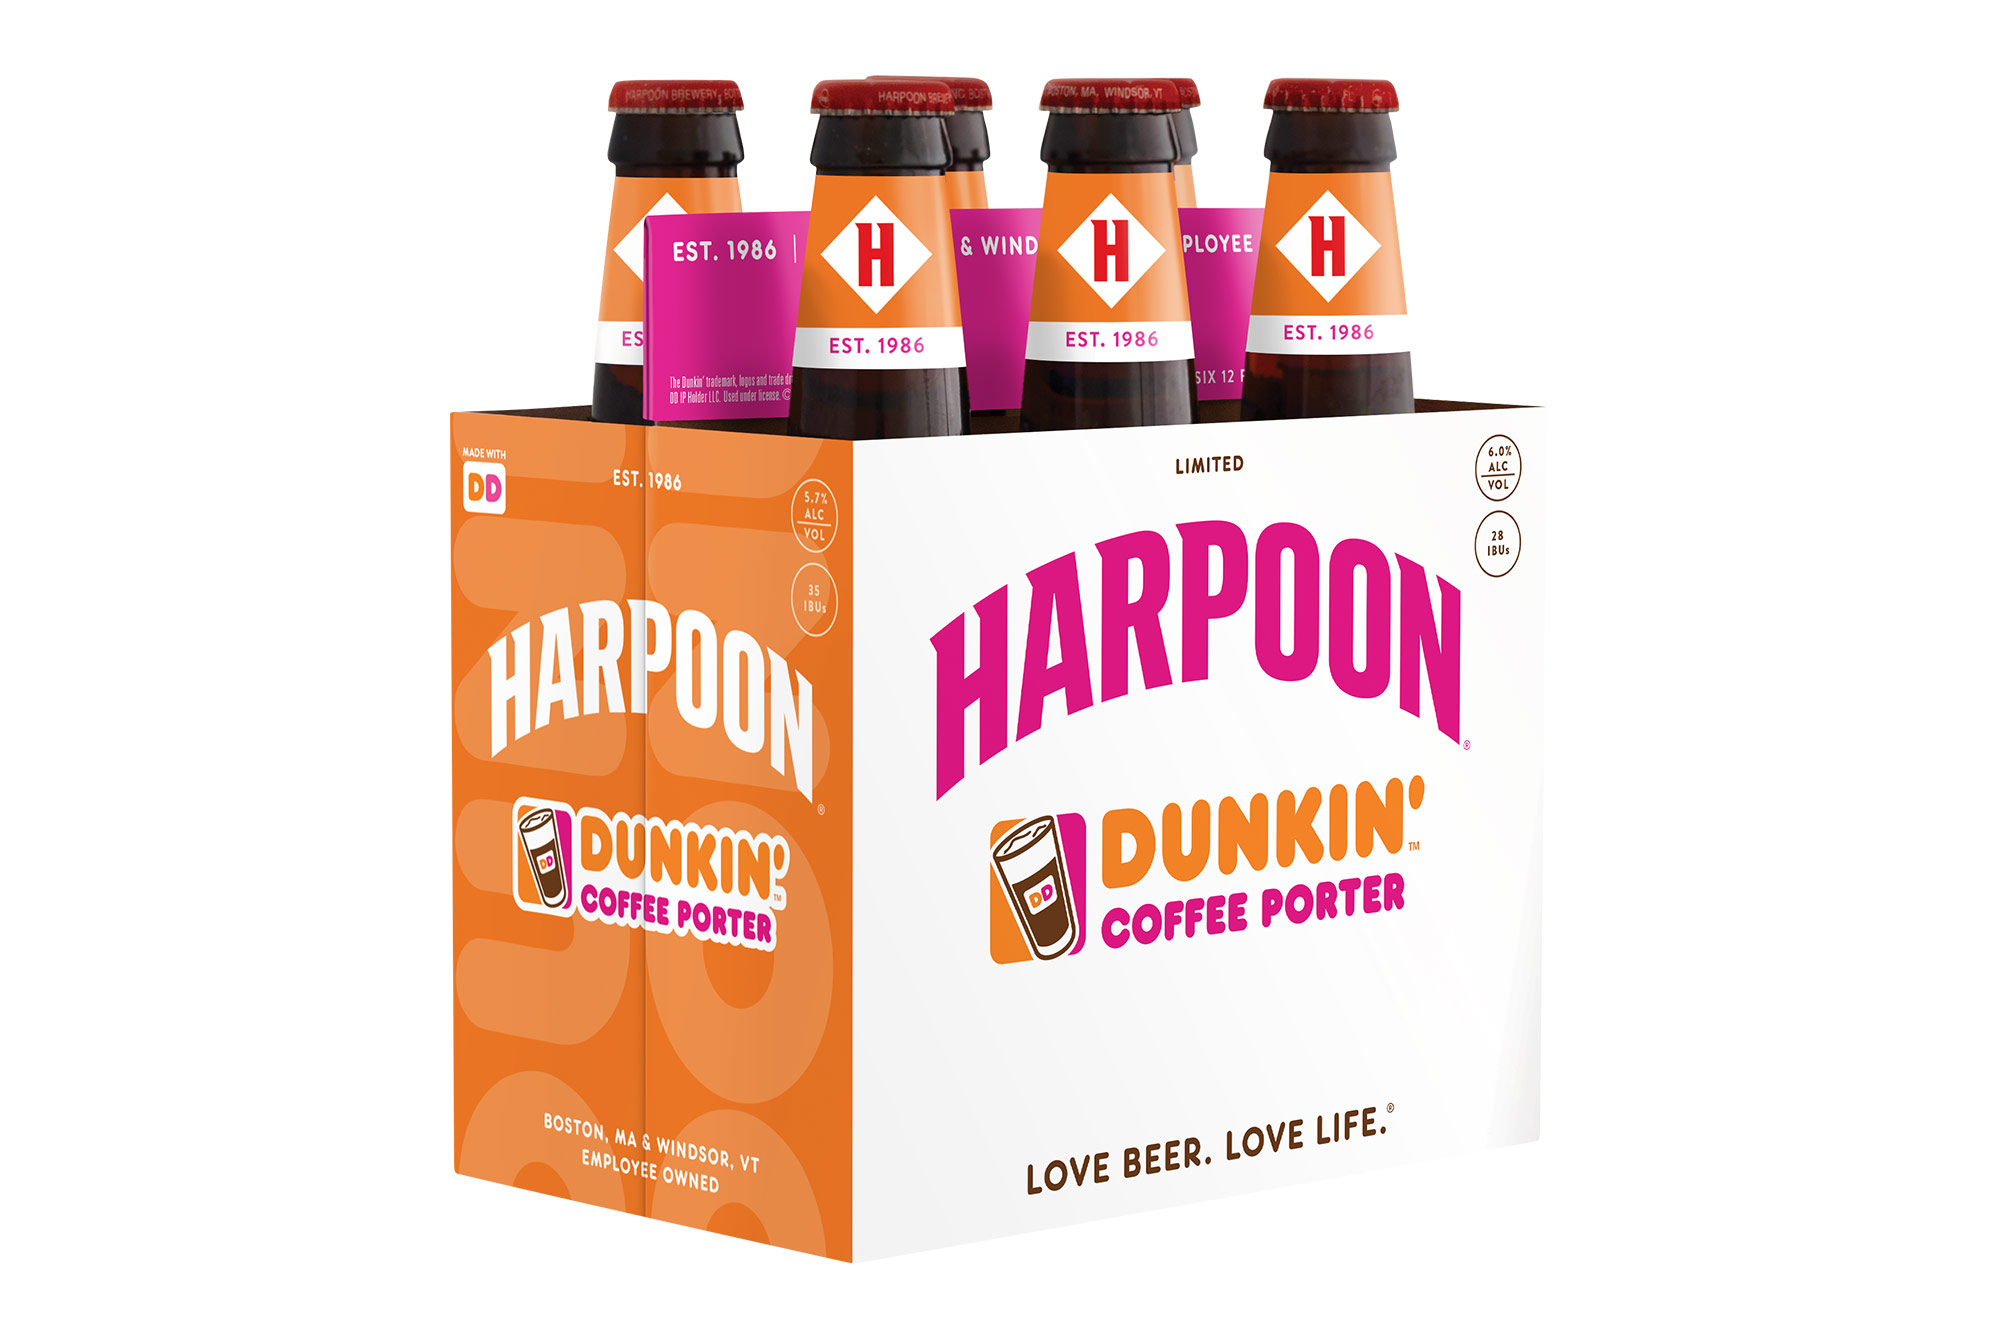 Dunkin’ Teams up with Harpoon for a Coffee Porter